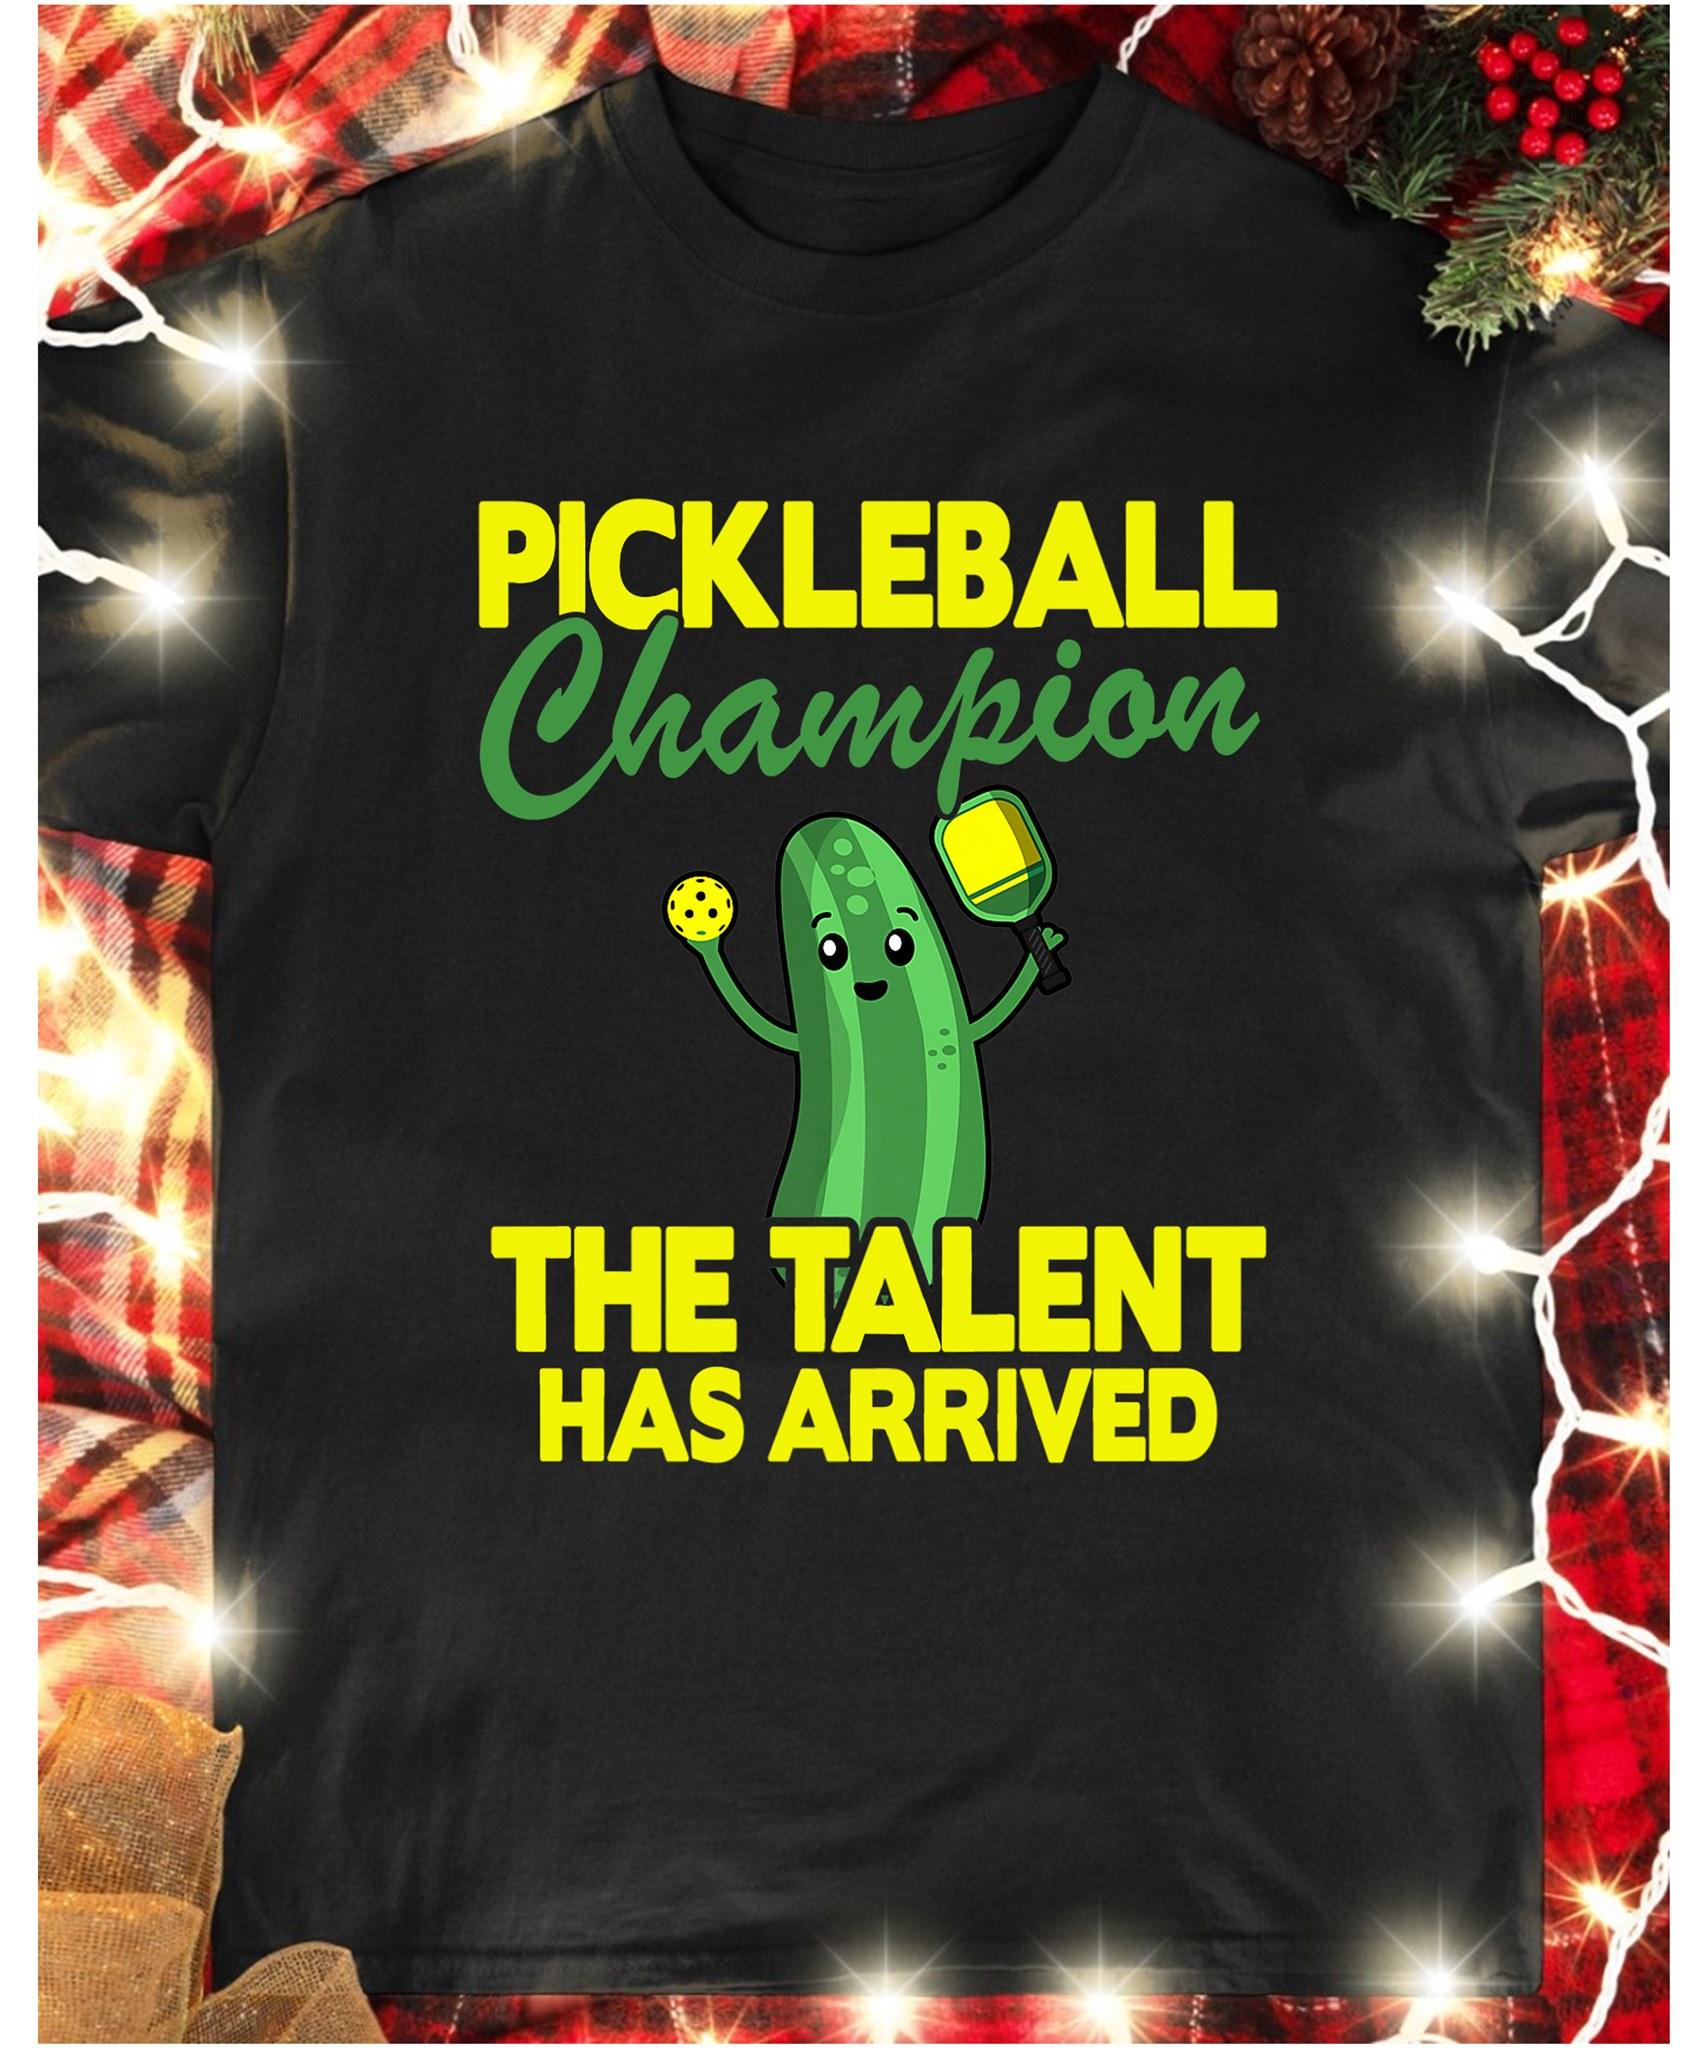 Pickleball champion, the talent has arrived - Pickleball and pickle